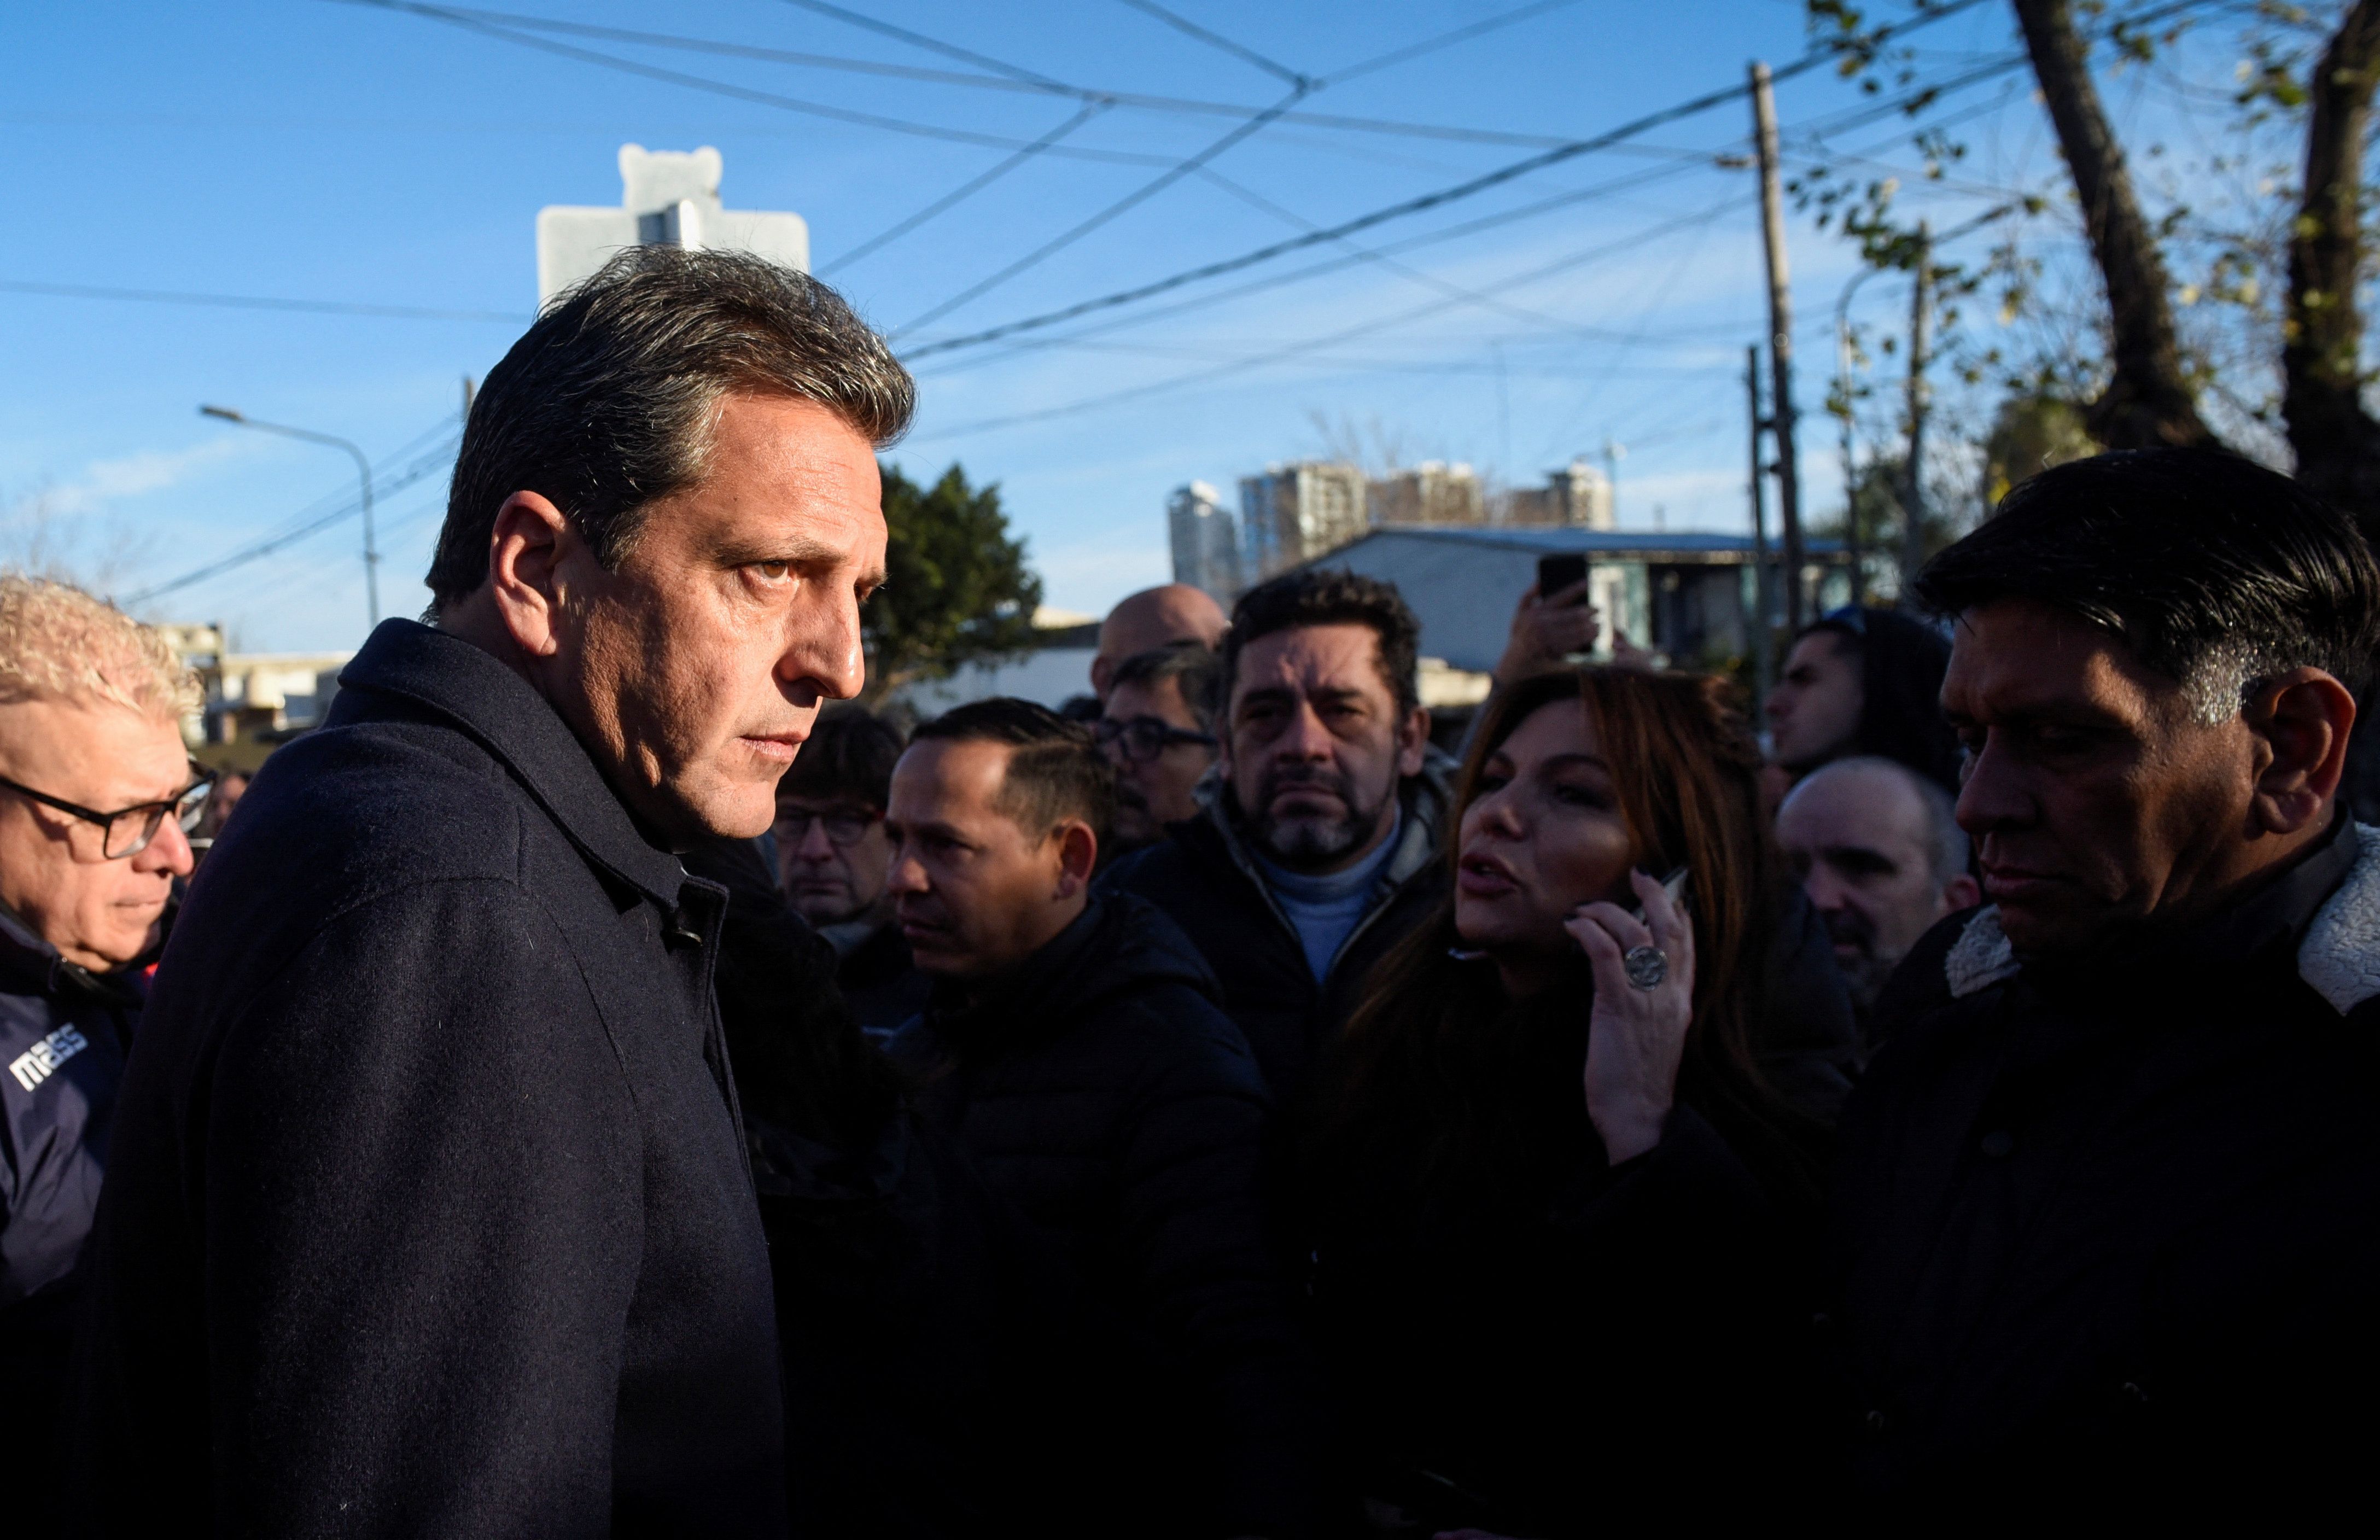 Argentina's Economy Minister and presidential pre-candidate Sergio Massa of Union por la Patria alliance looks on, on the day of Argentina's primary elections, near a polling station in Tigre, on the outskirts of Buenos Aires, Argentina August 13, 2023. REUTERS/Mariana Nedelcu